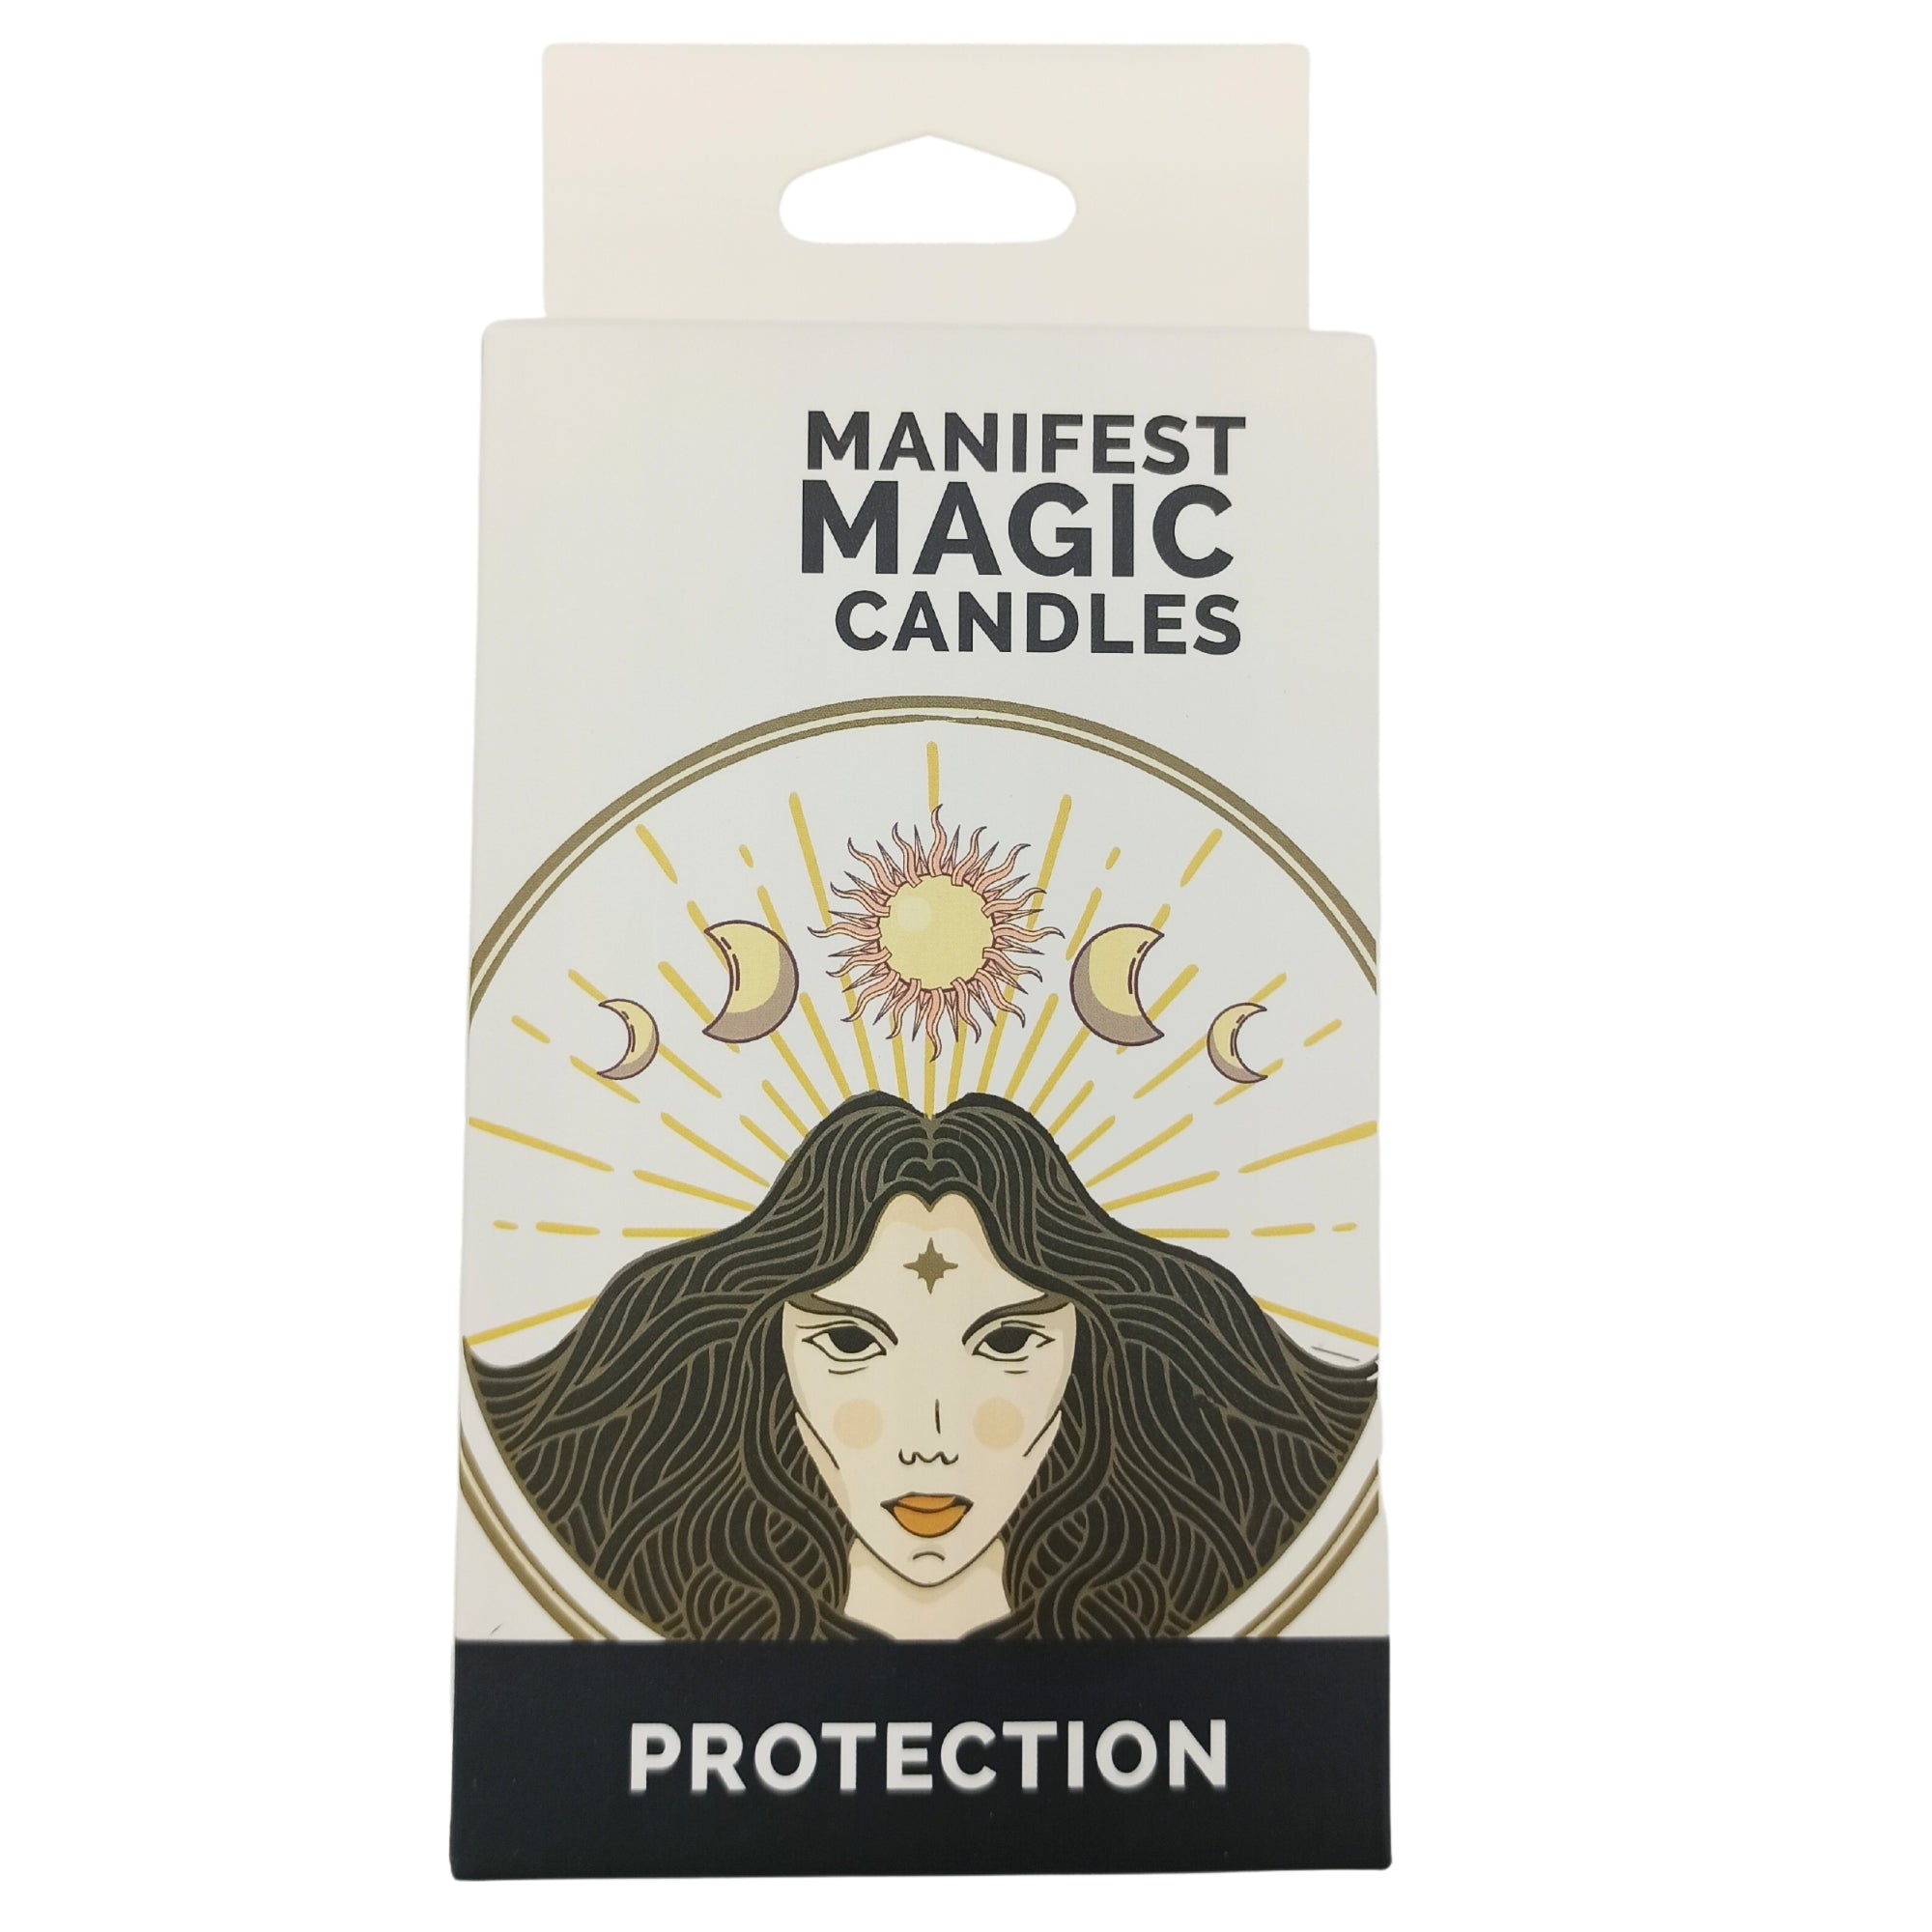 View Manifest Magic Candles pack of 12 Ivory information